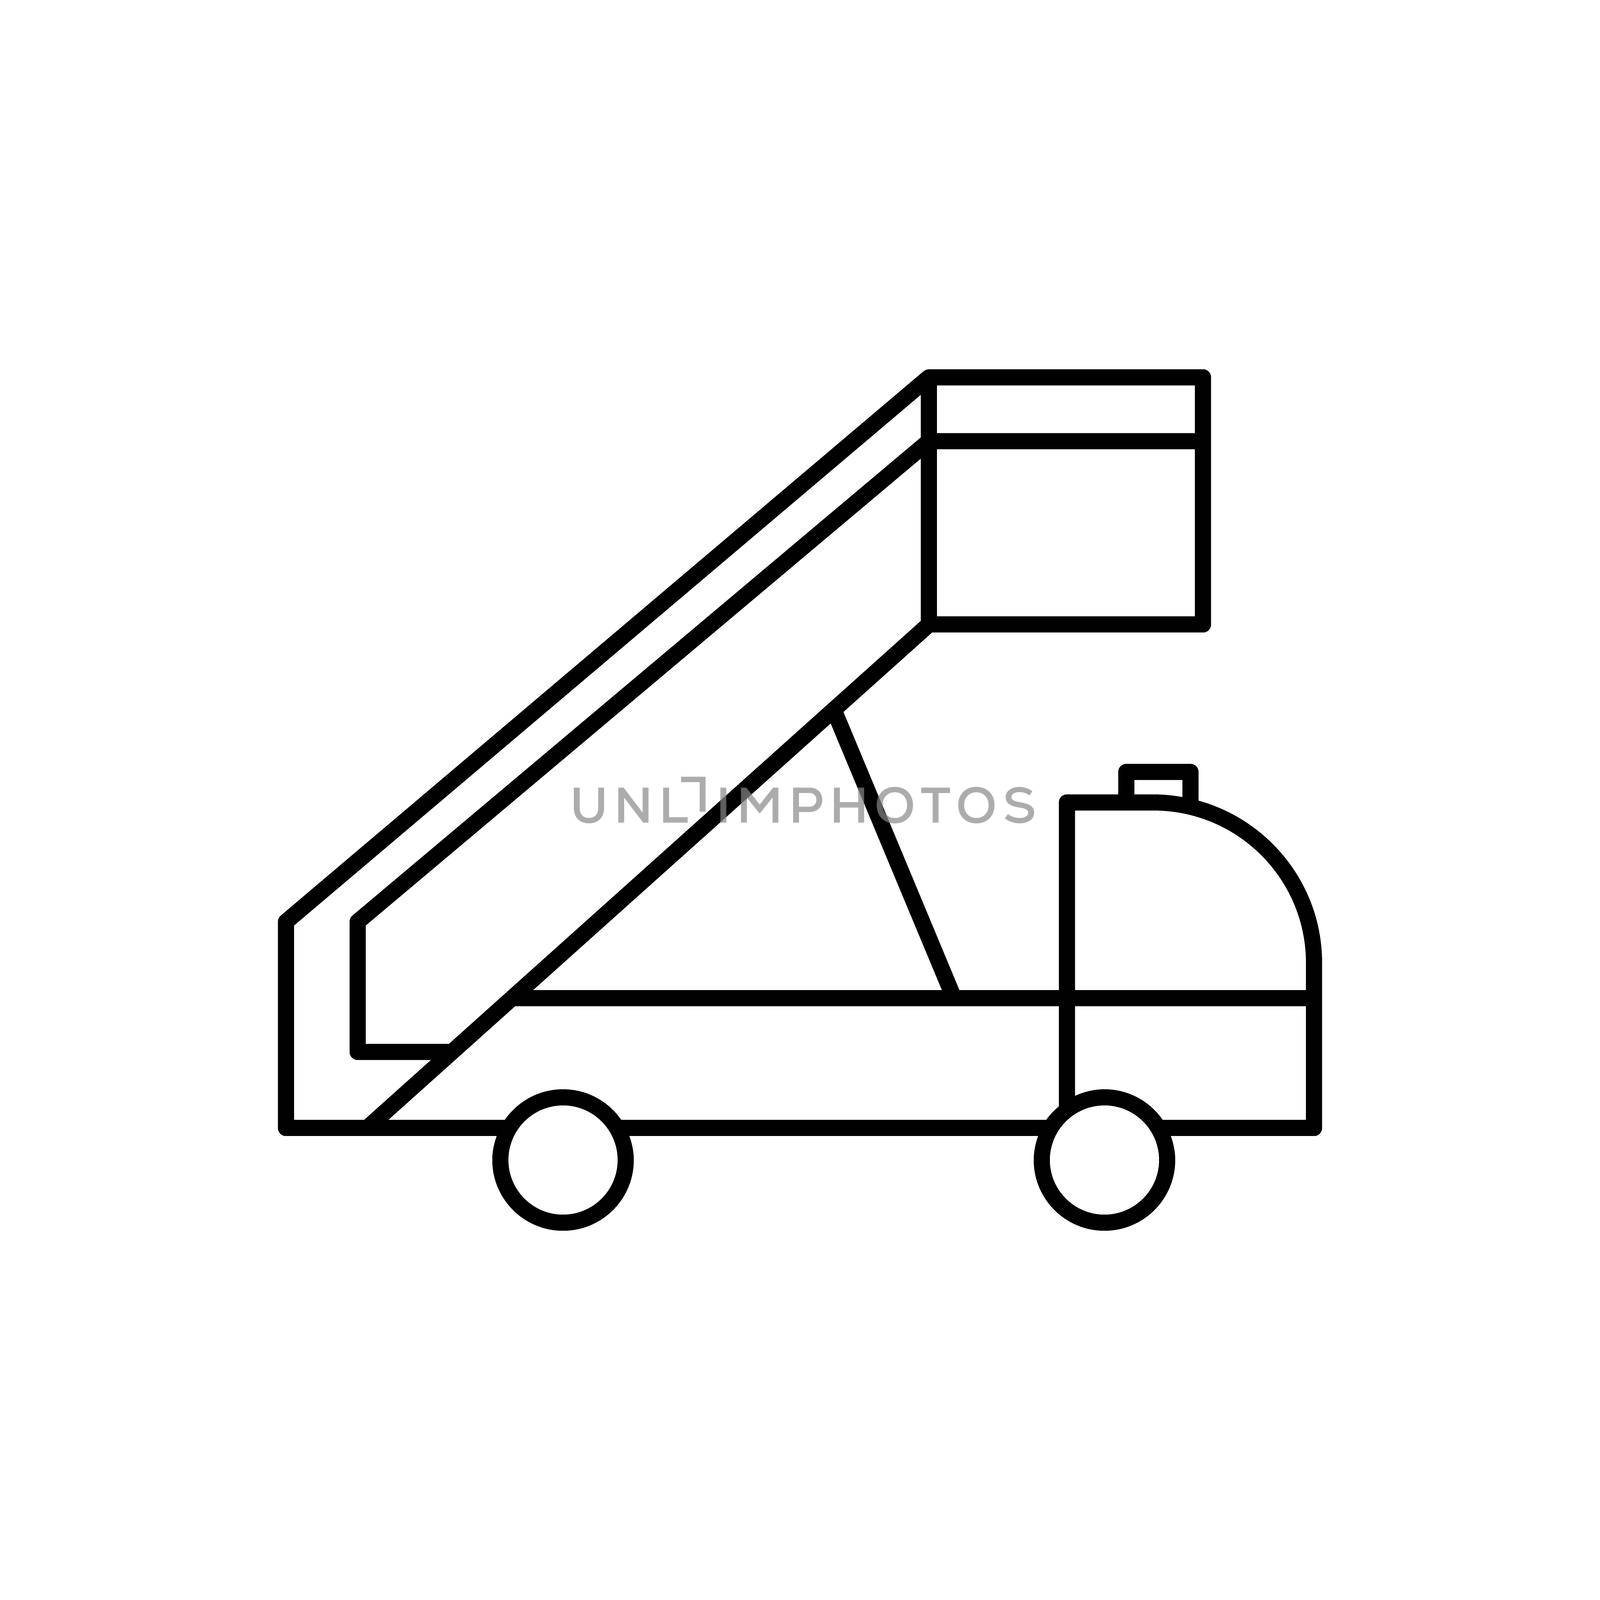 boarding, stair truck, stairs line icon. elements of airport, travel illustration icons. signs, symbols can be used for web, logo, mobile app, UI, UX by fidaneagle